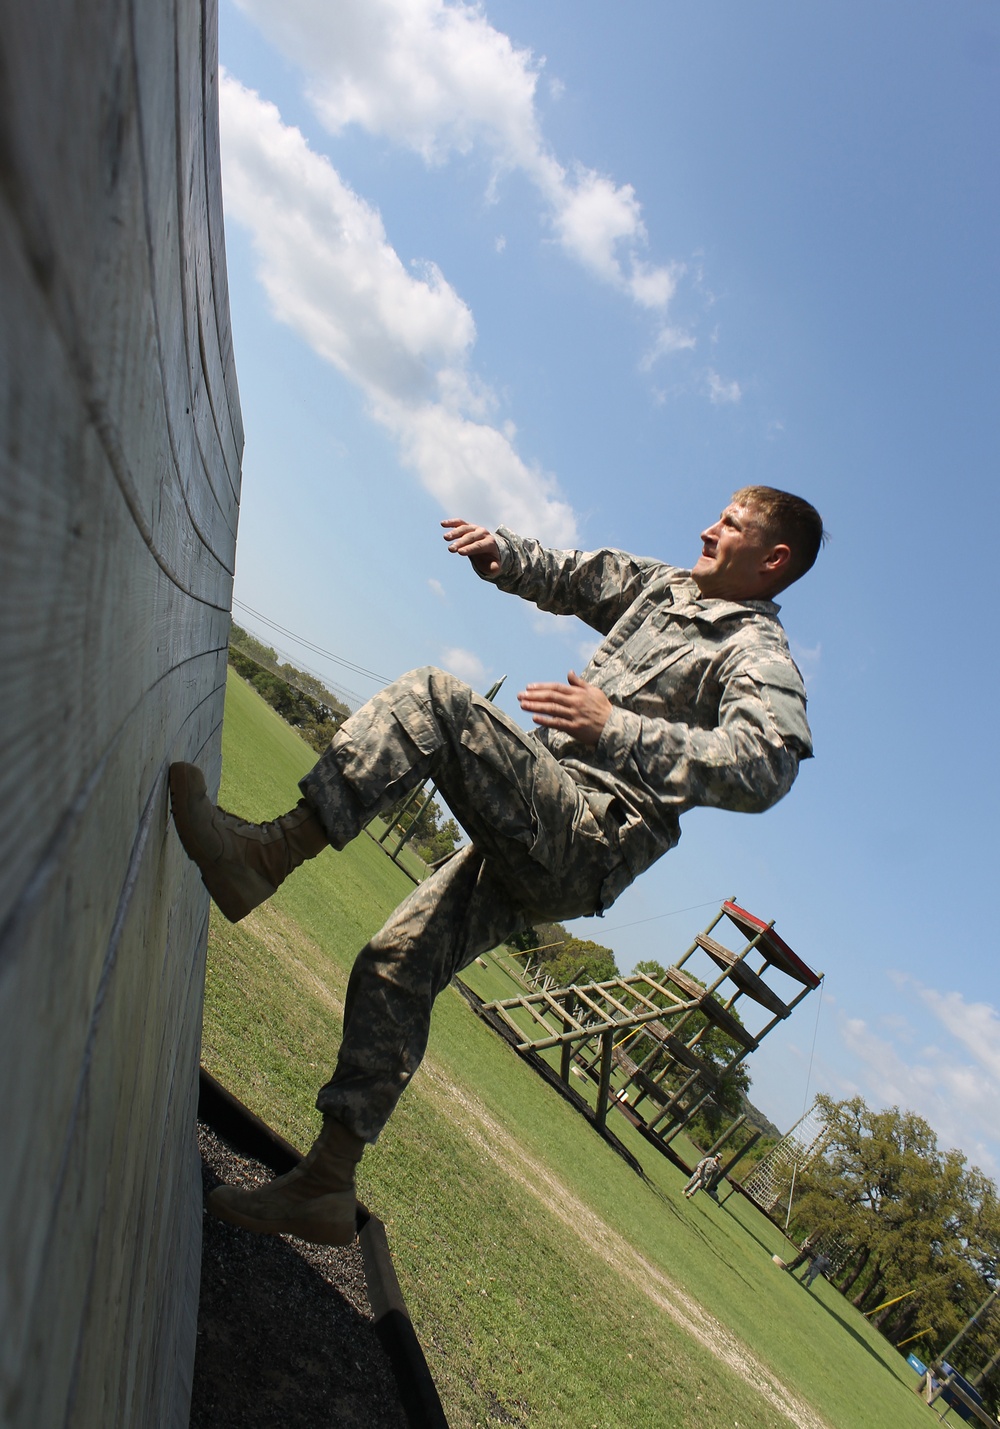 Omaha, Nebraska Native Earns Division Army Reserve Competition